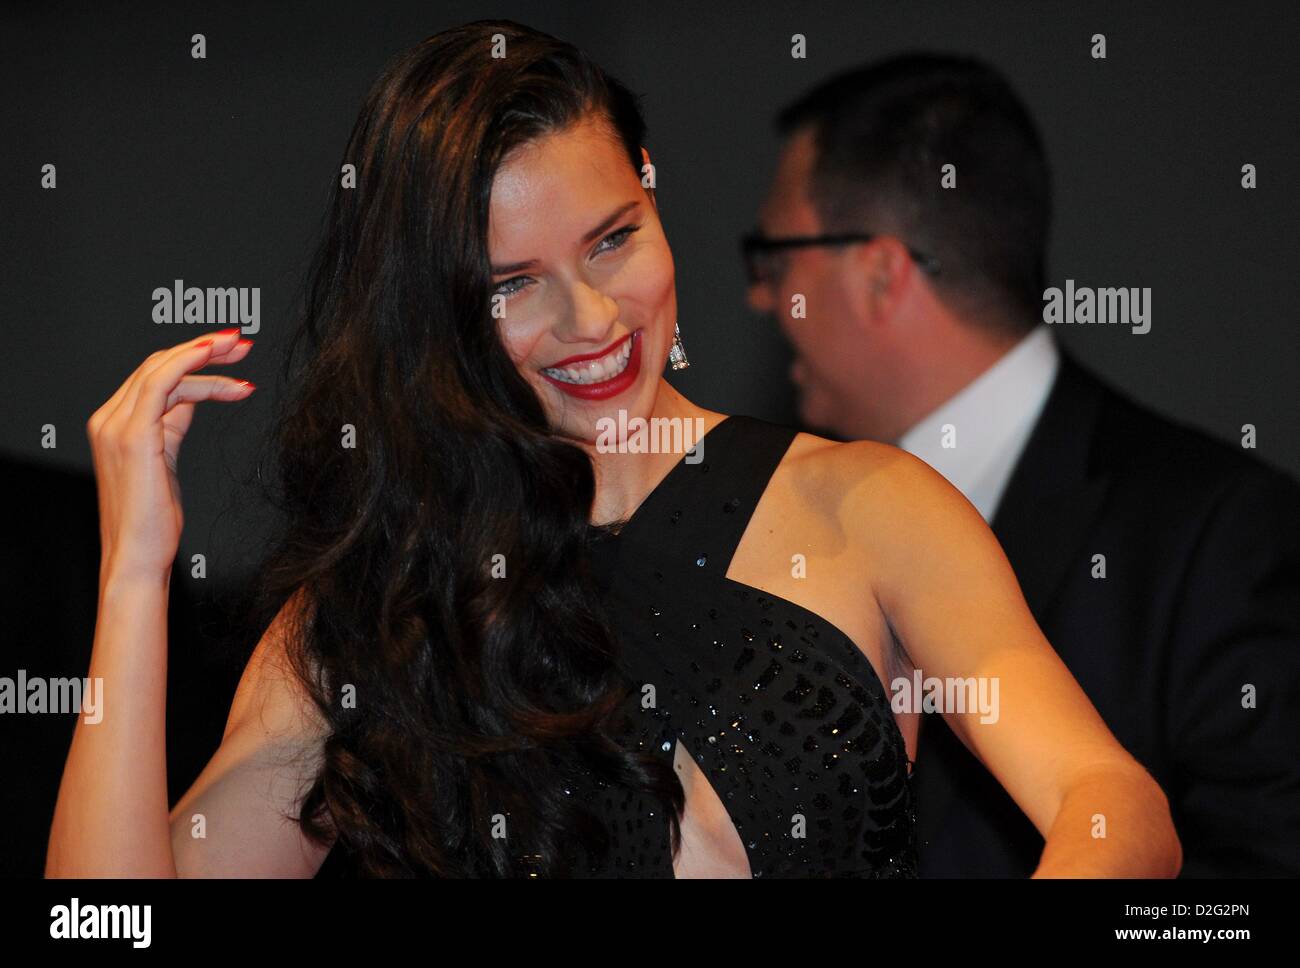 Geneva, Switzerland. 22nd January 2013. Brazilian Model and Actress Adriana Lima attends at IWC Race Night Dinner in Geneva.The swiss watch manufactur celebrated its new Ingenieur collection as well as the partnershipwith the Mercedes AMG Petronas Formula One Team. Photo: Frank May/picture alliance/ Alamy Live News Stock Photo